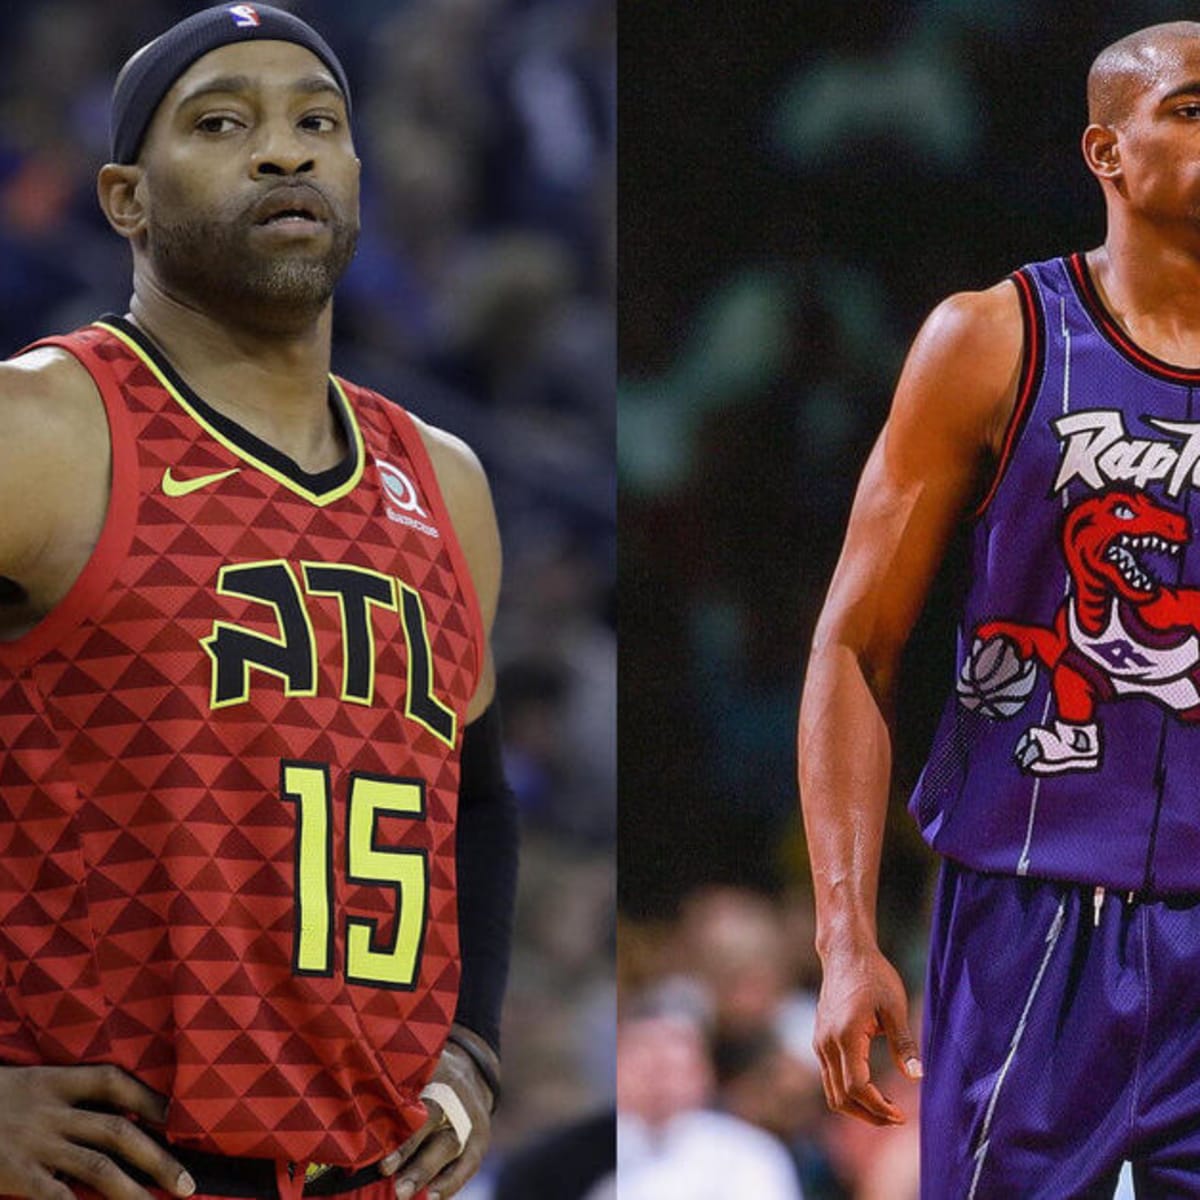 Vince Carter sides with LeBron's take on the 2021 All-Star Game